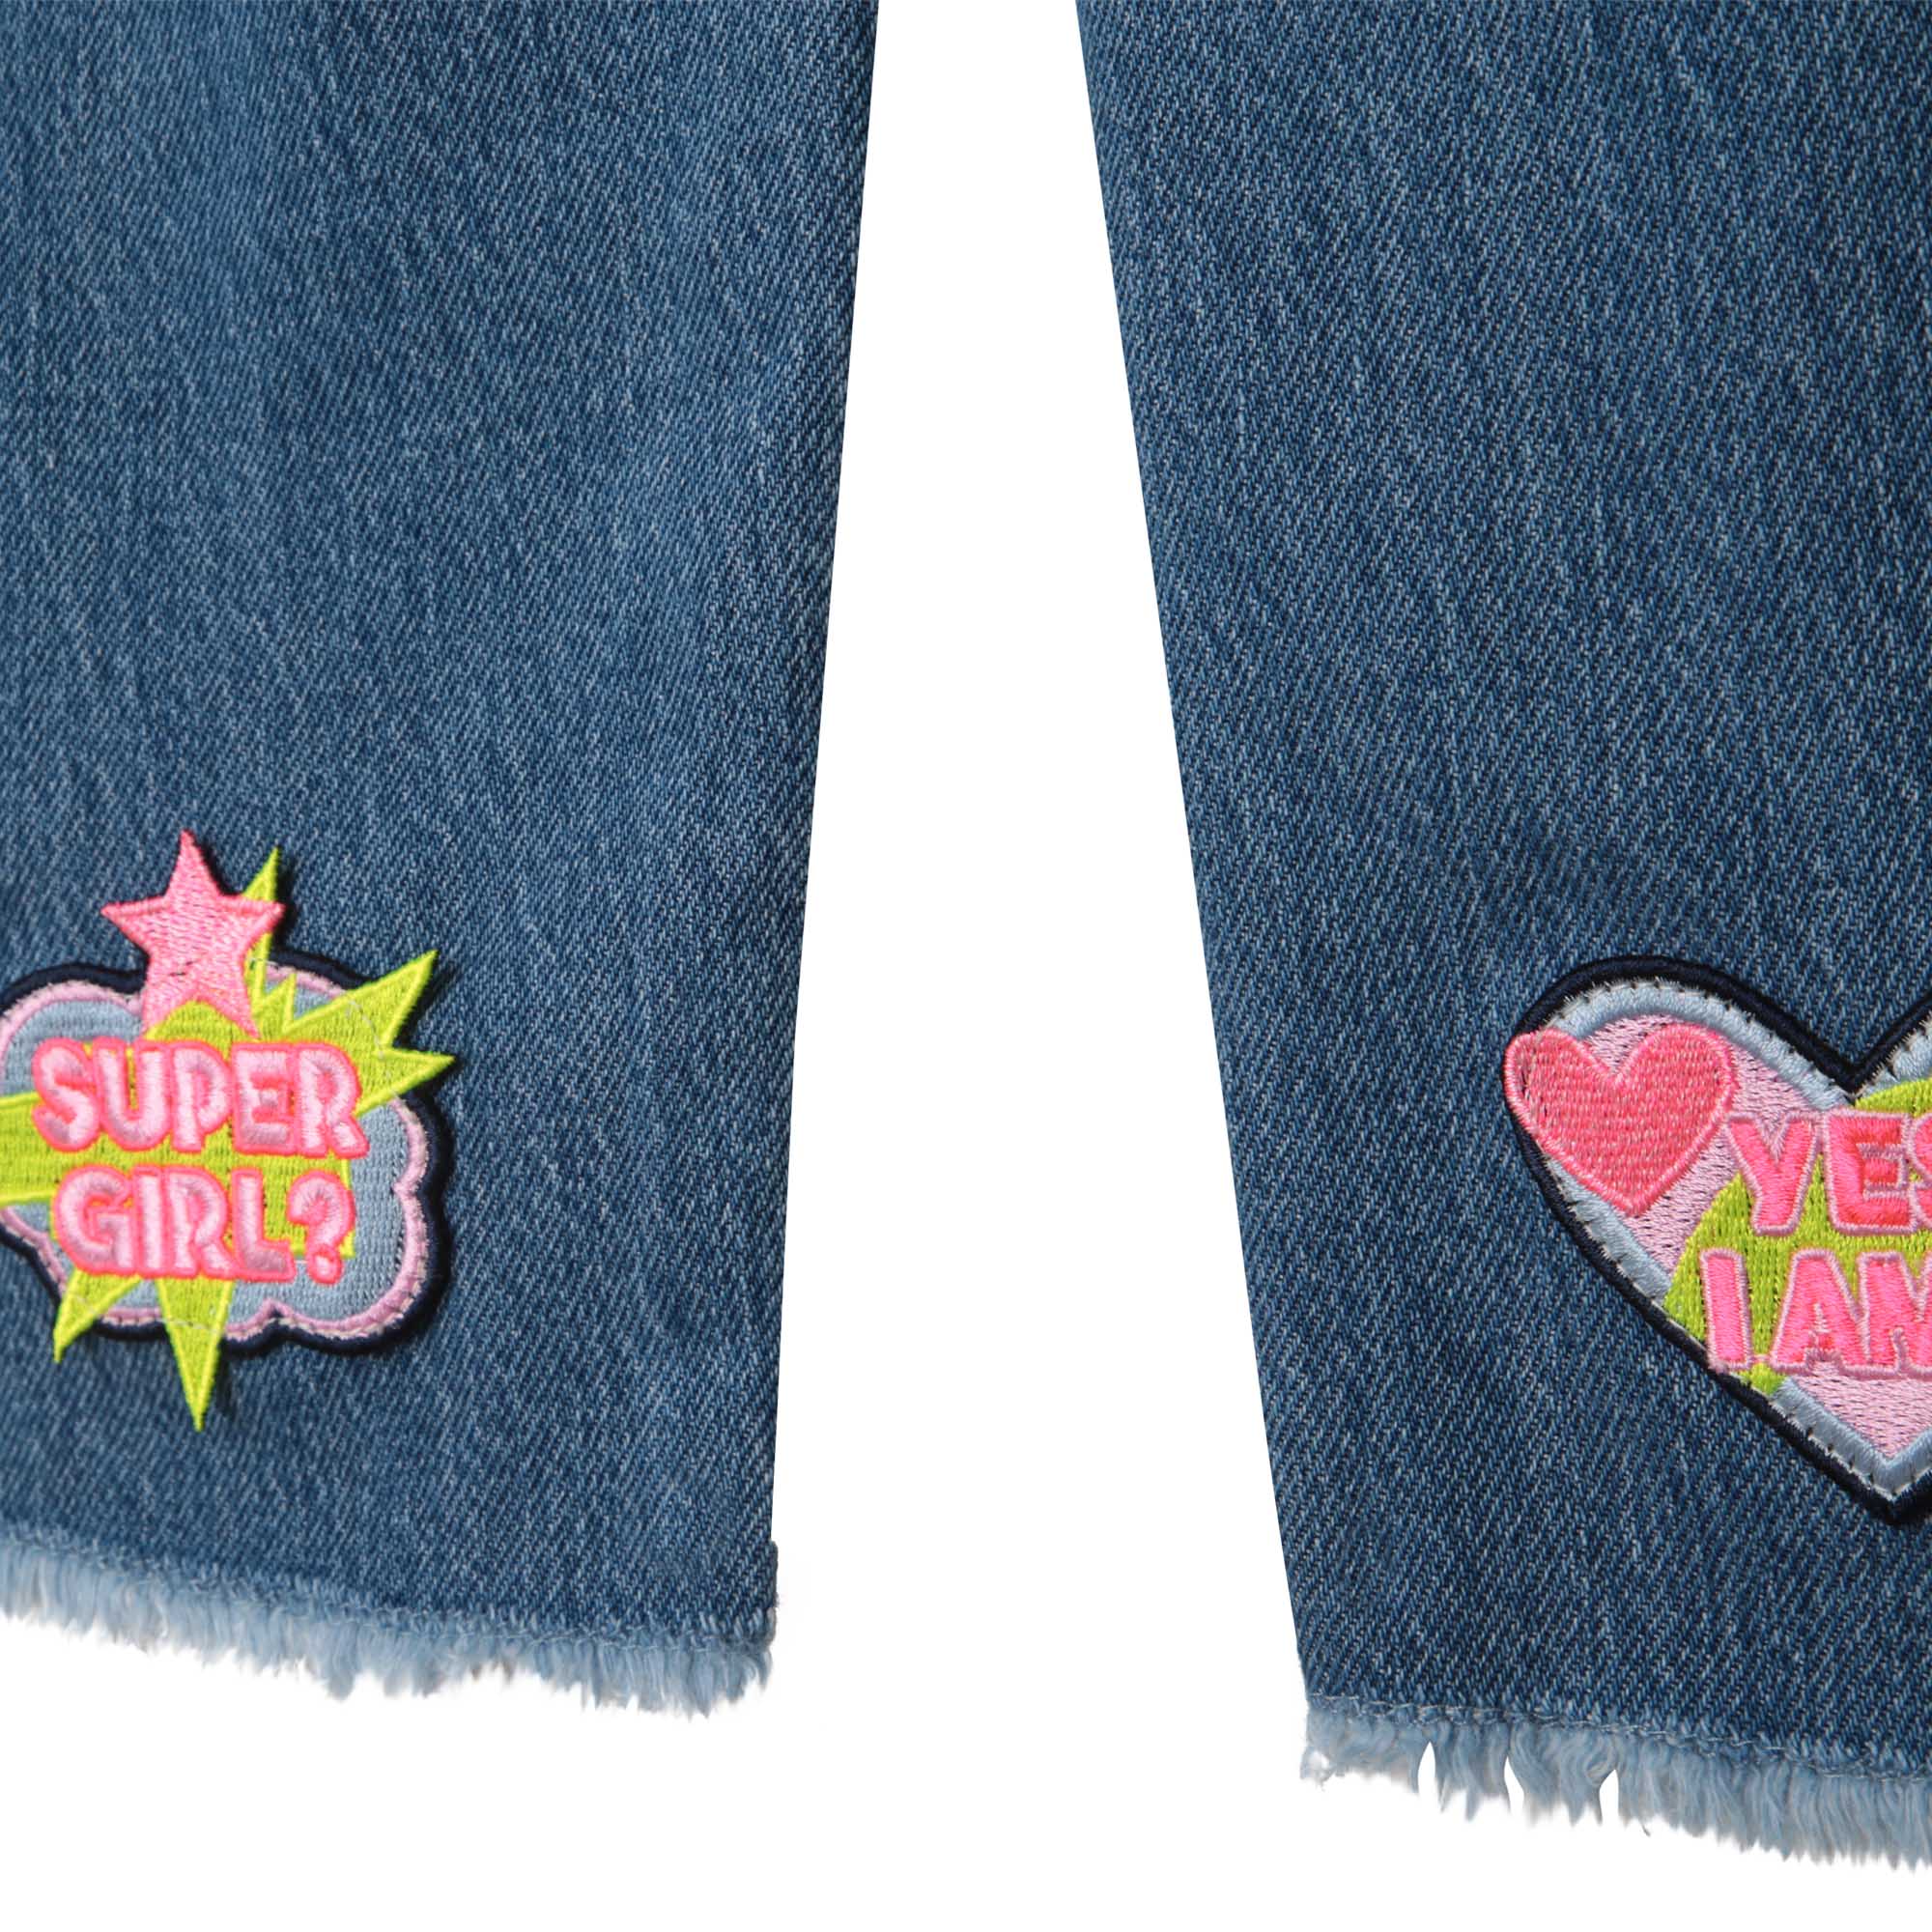 Billieblush girls jeans with heart logos - close up